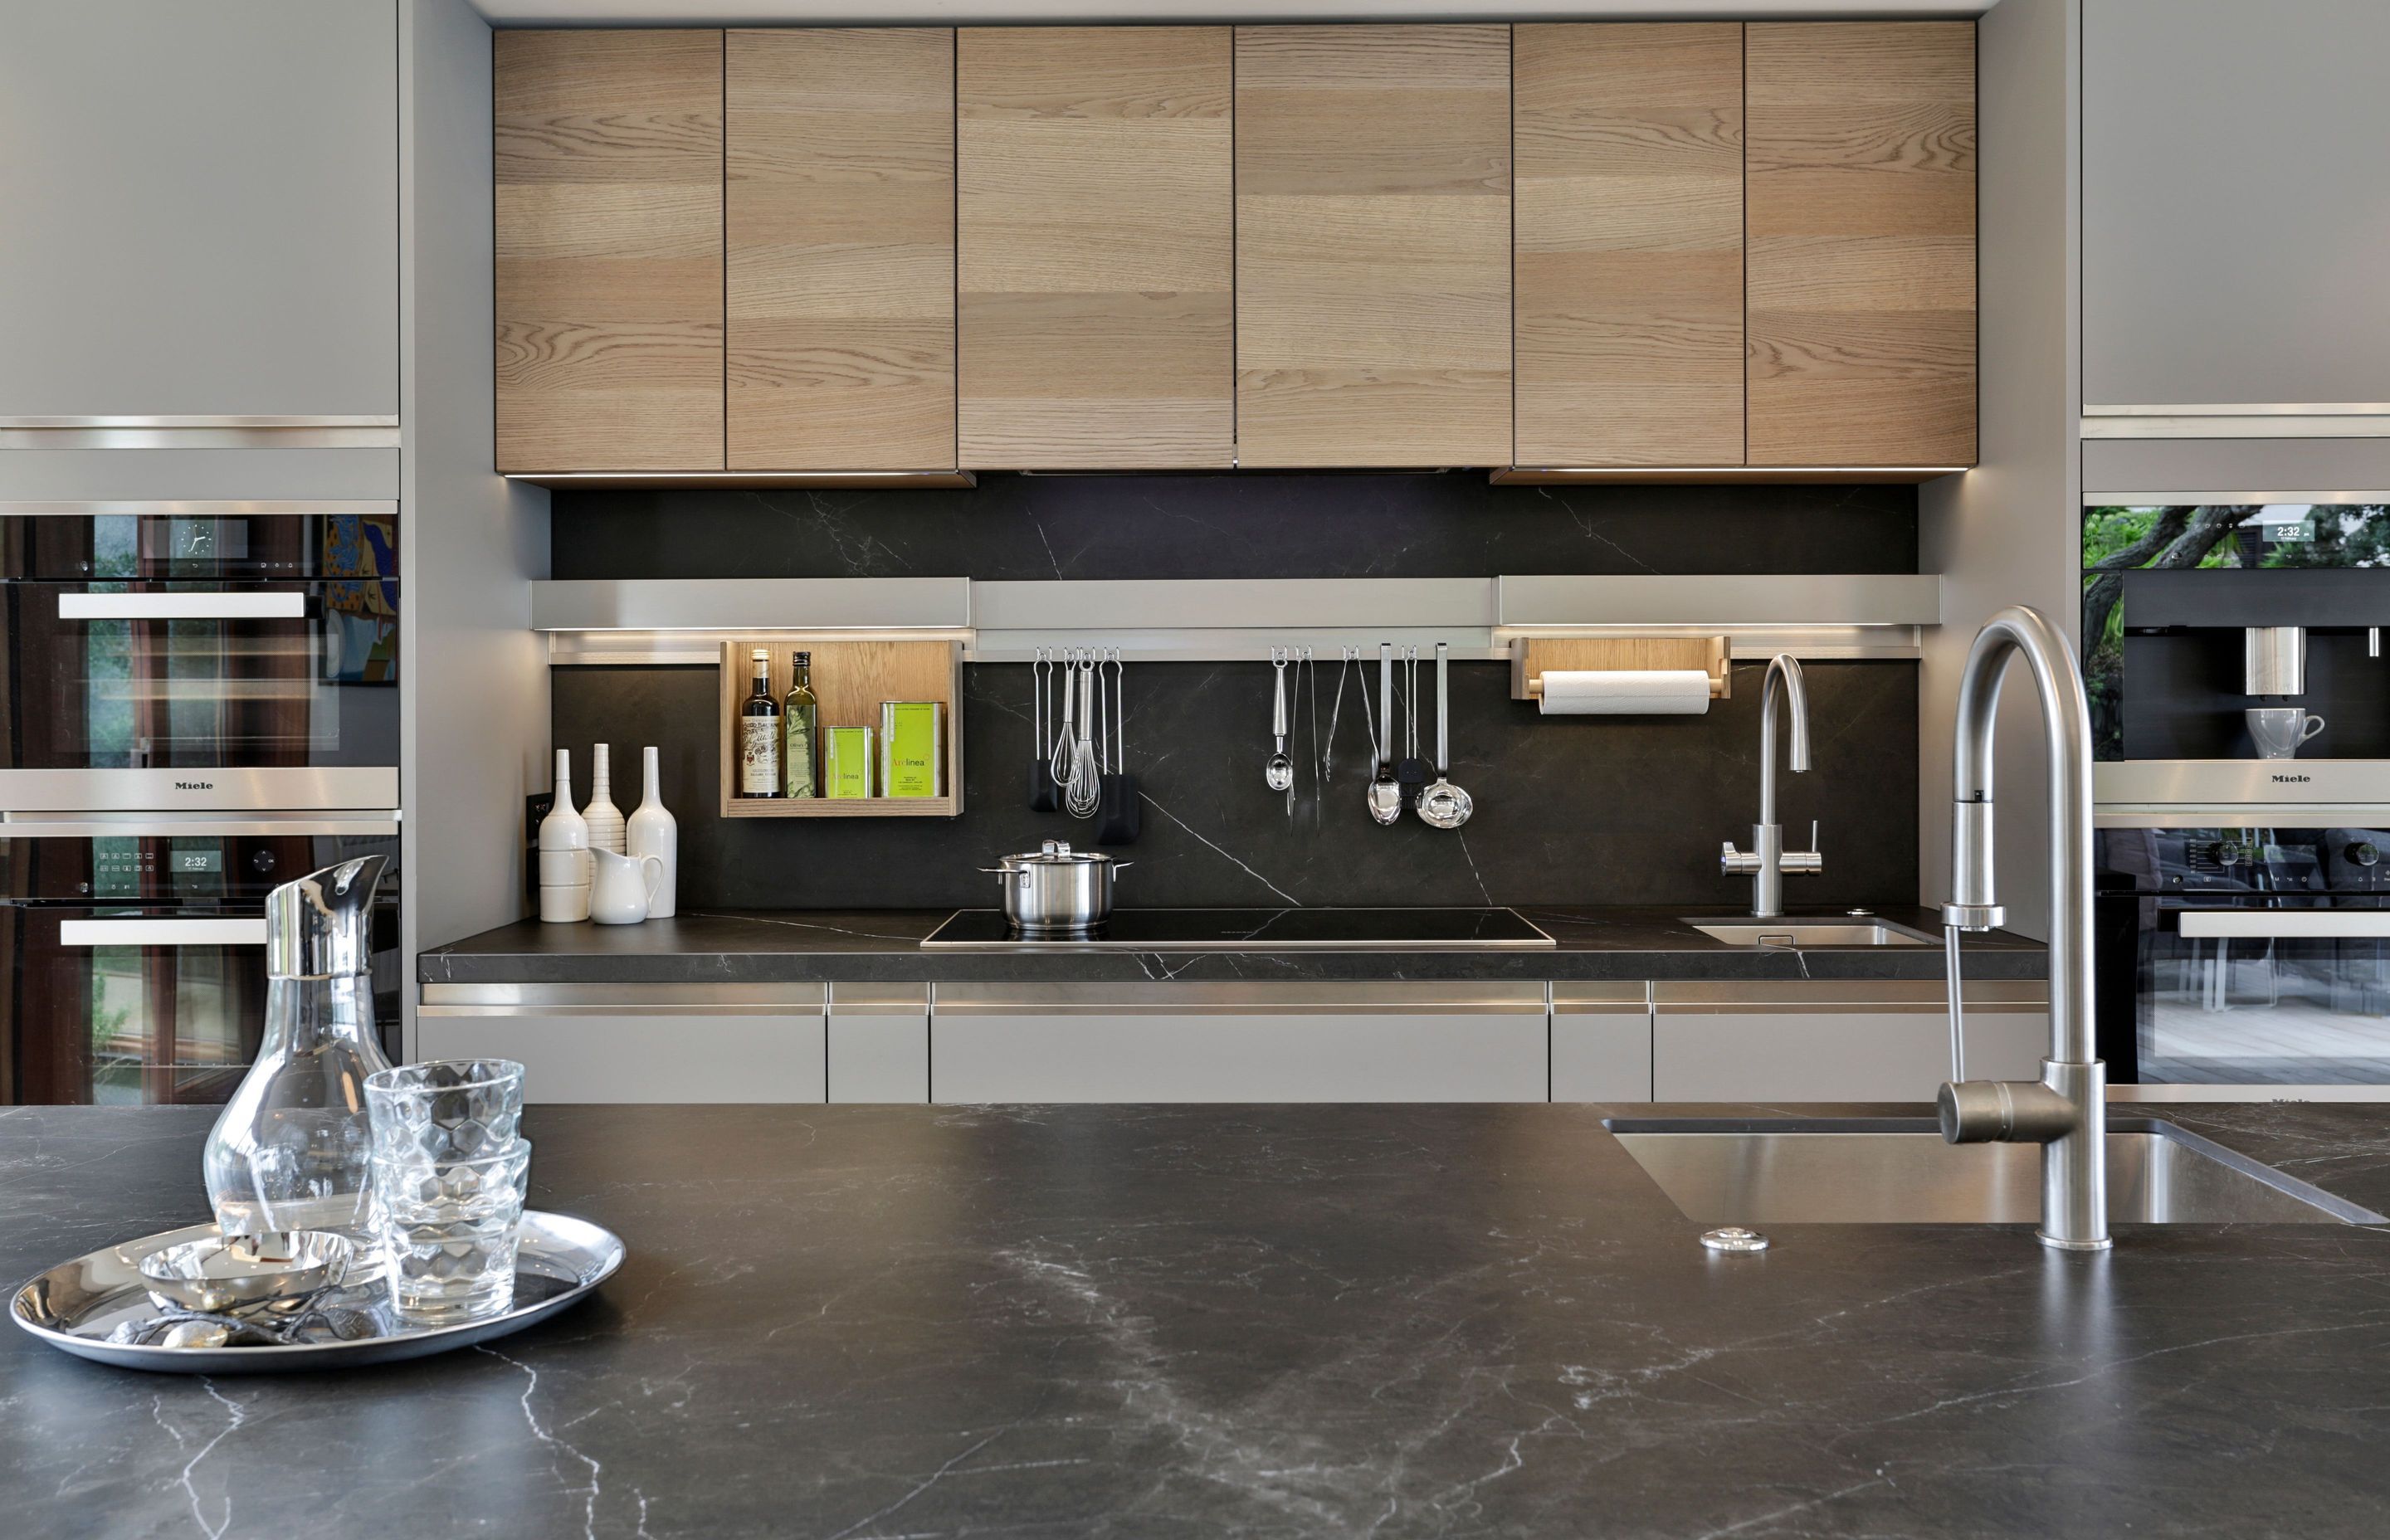 Fossil oak wood veneer was chosen for the upper cabinets providing textural contrast to the Armour Grigio finish of the other cabinetry. The iStone porcelain splashback, bench top and island provide dramatic contrast while the innovative Mensolinea shelf 